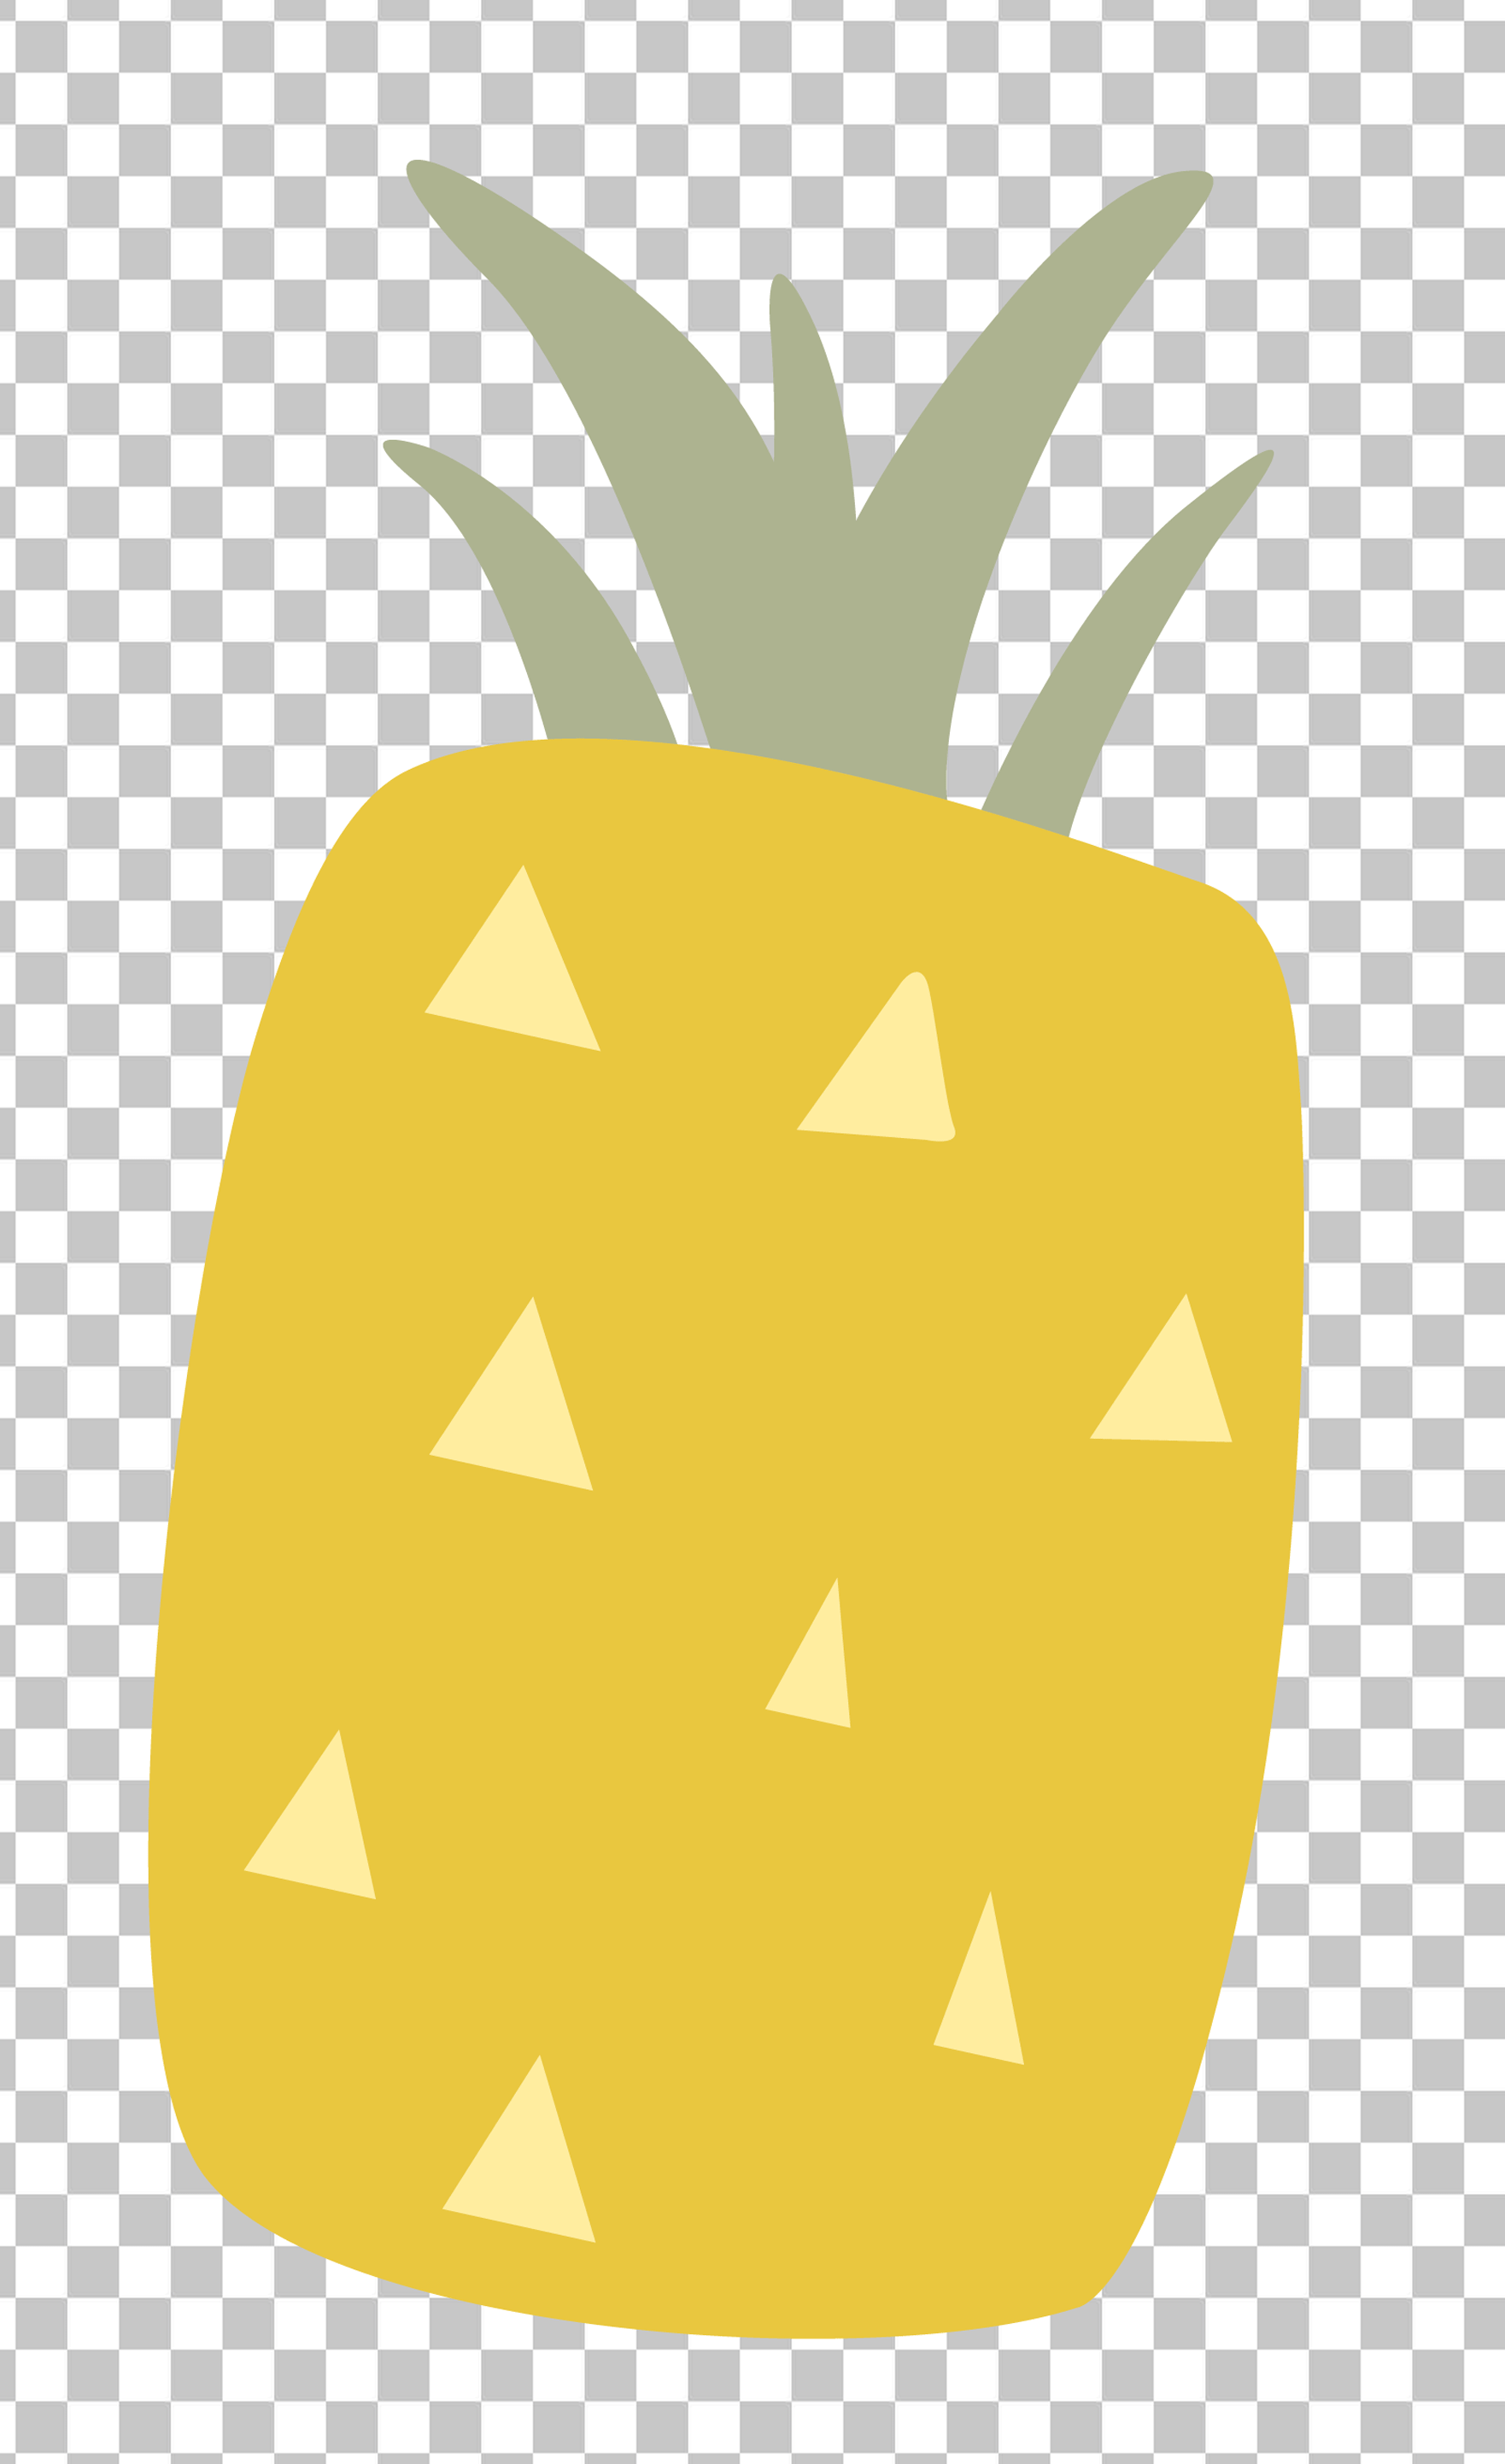 Pineapple with triangles